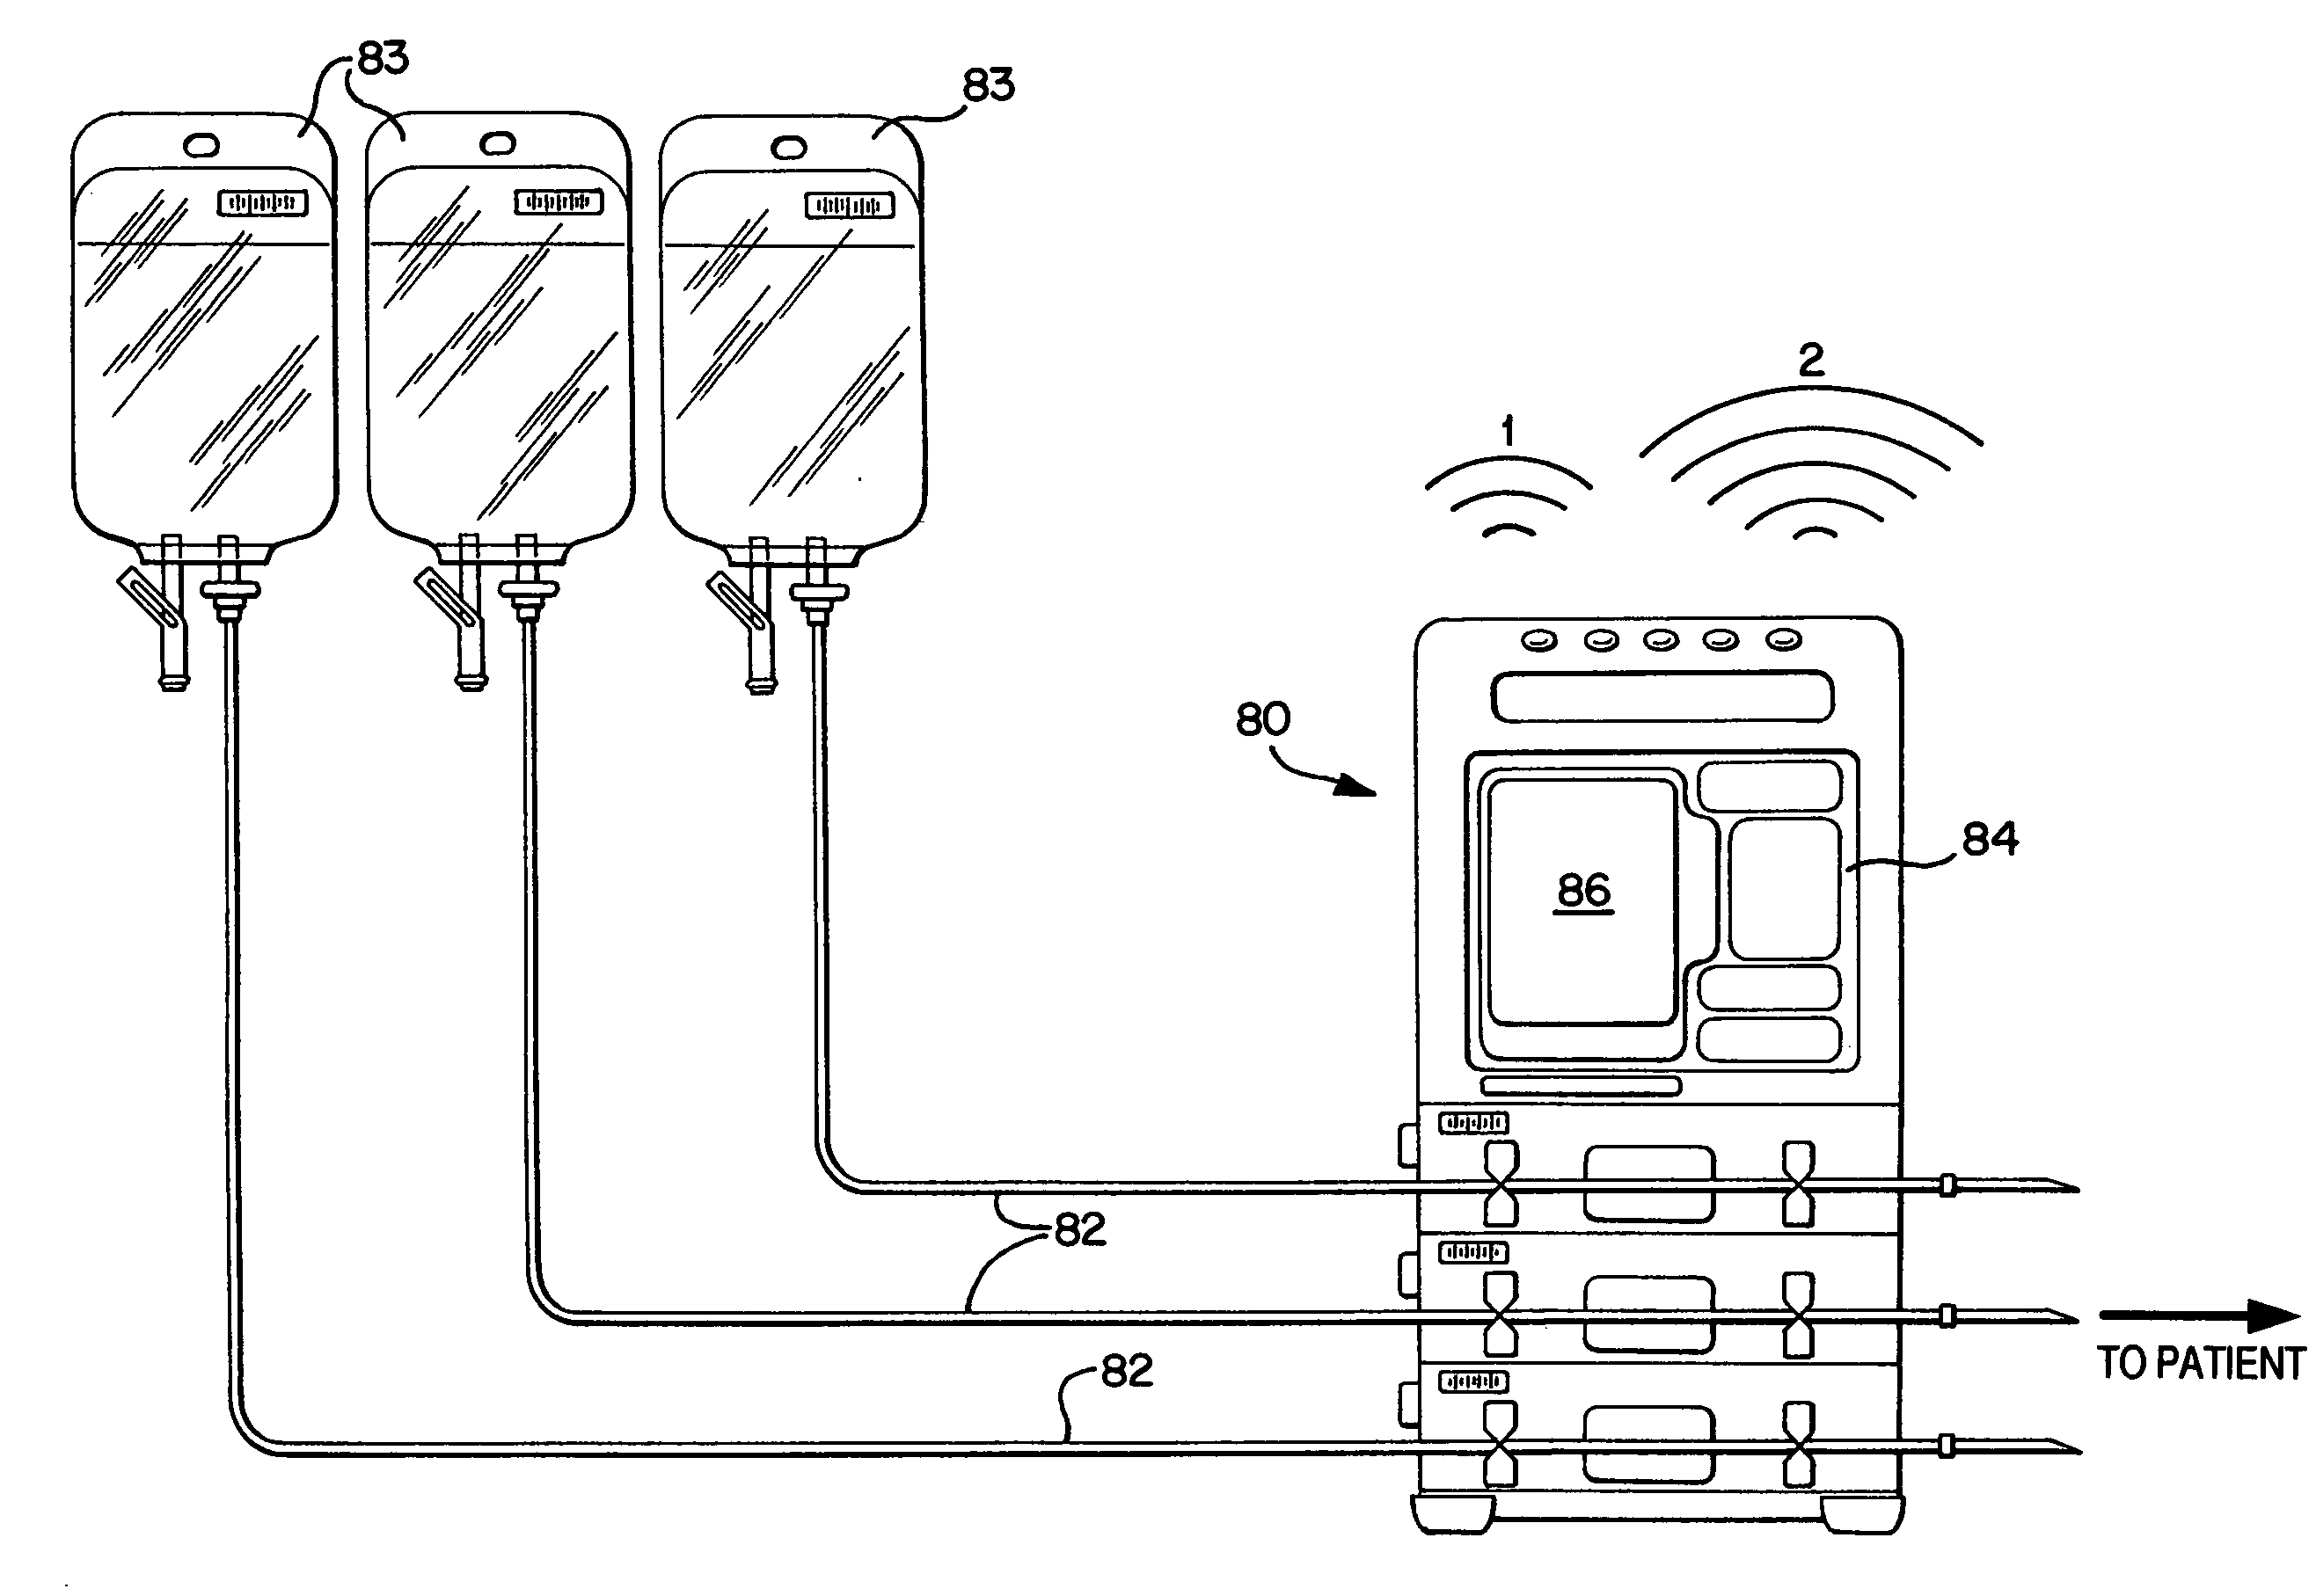 Multi-state alarm system for a medical pump